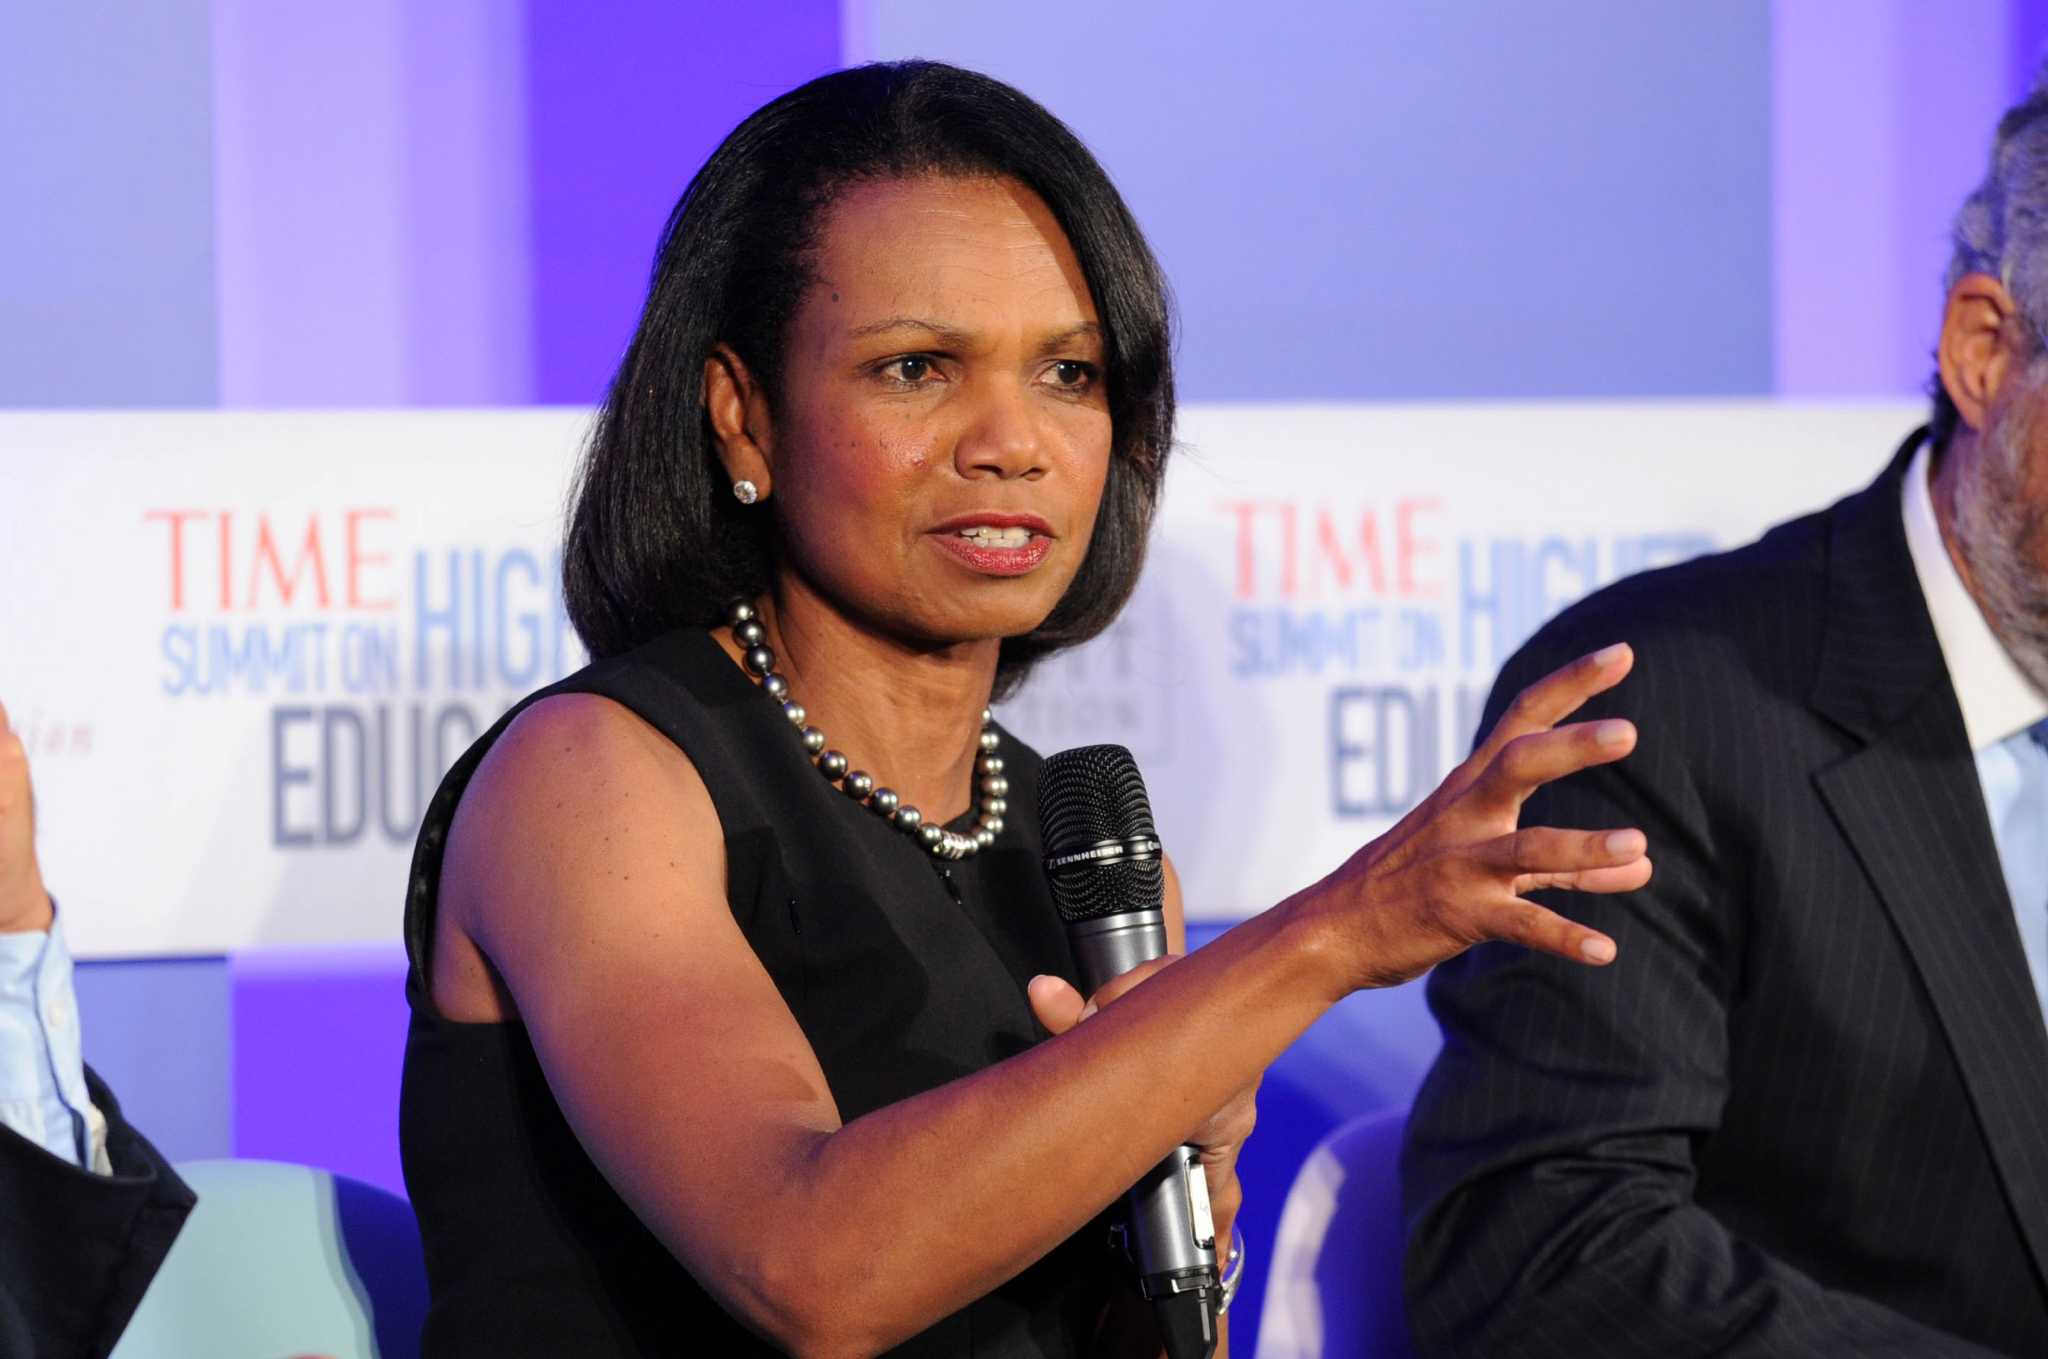 Texans get inspirational message from Condoleezza Rice.